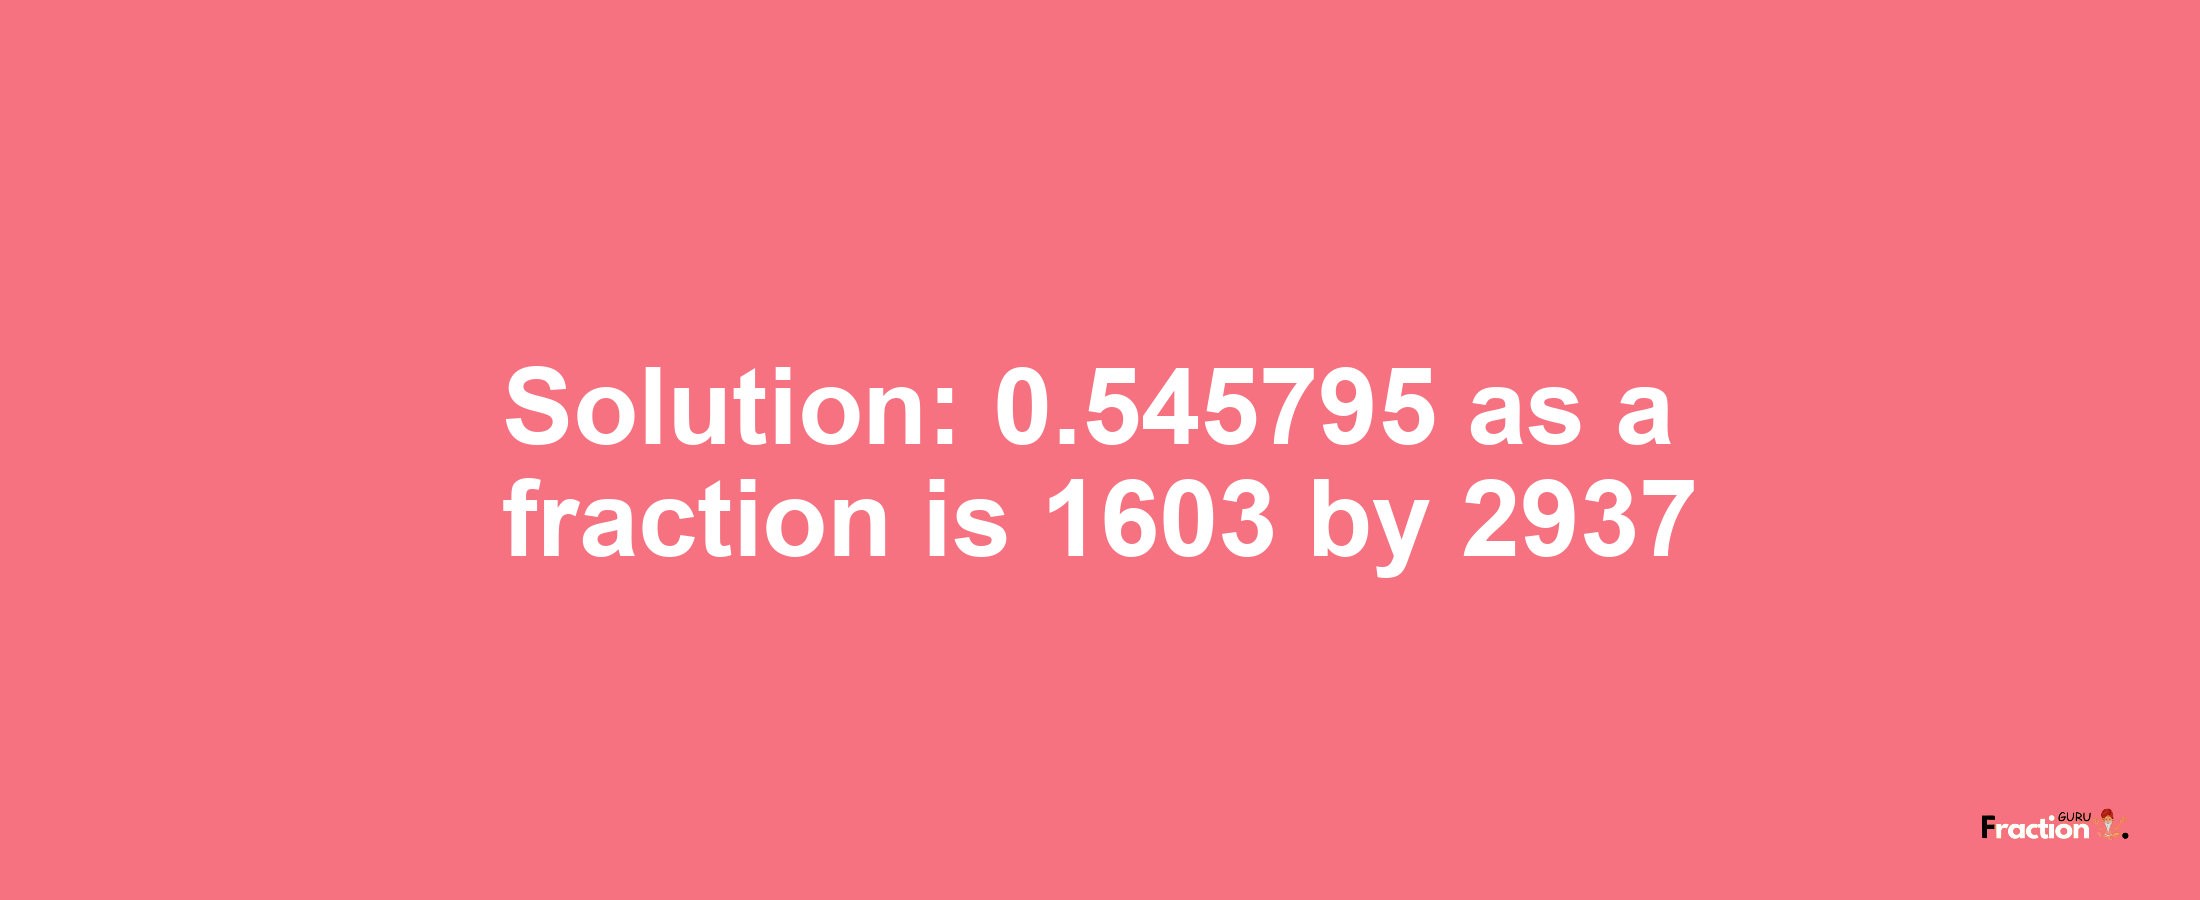 Solution:0.545795 as a fraction is 1603/2937